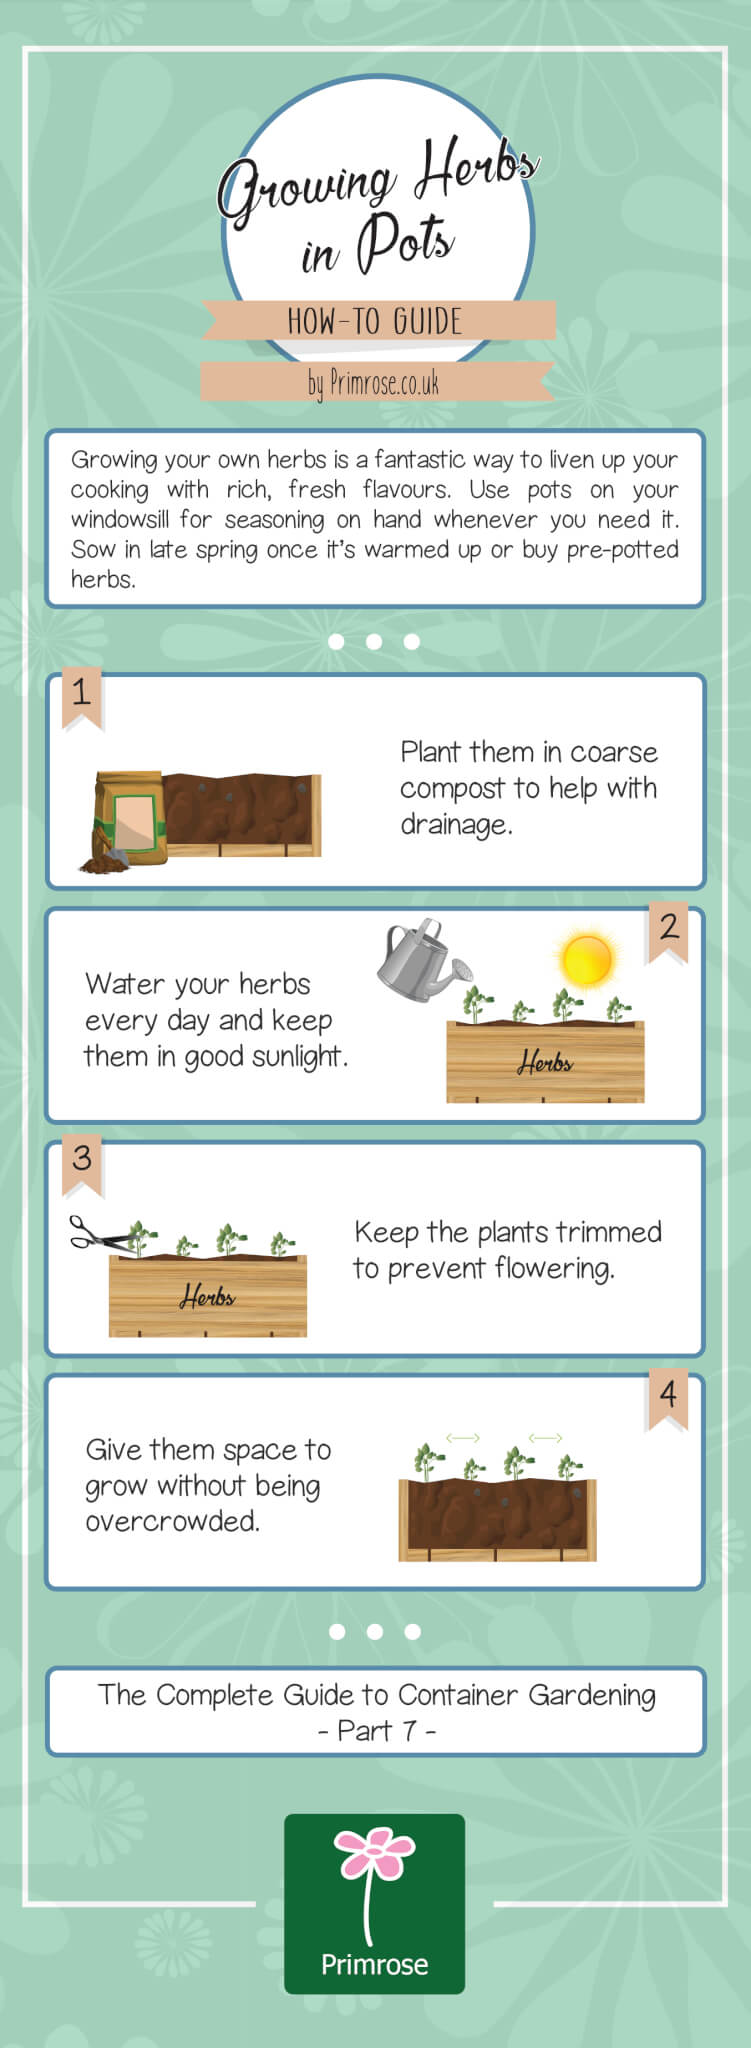 How to grow herbs in pots infographic